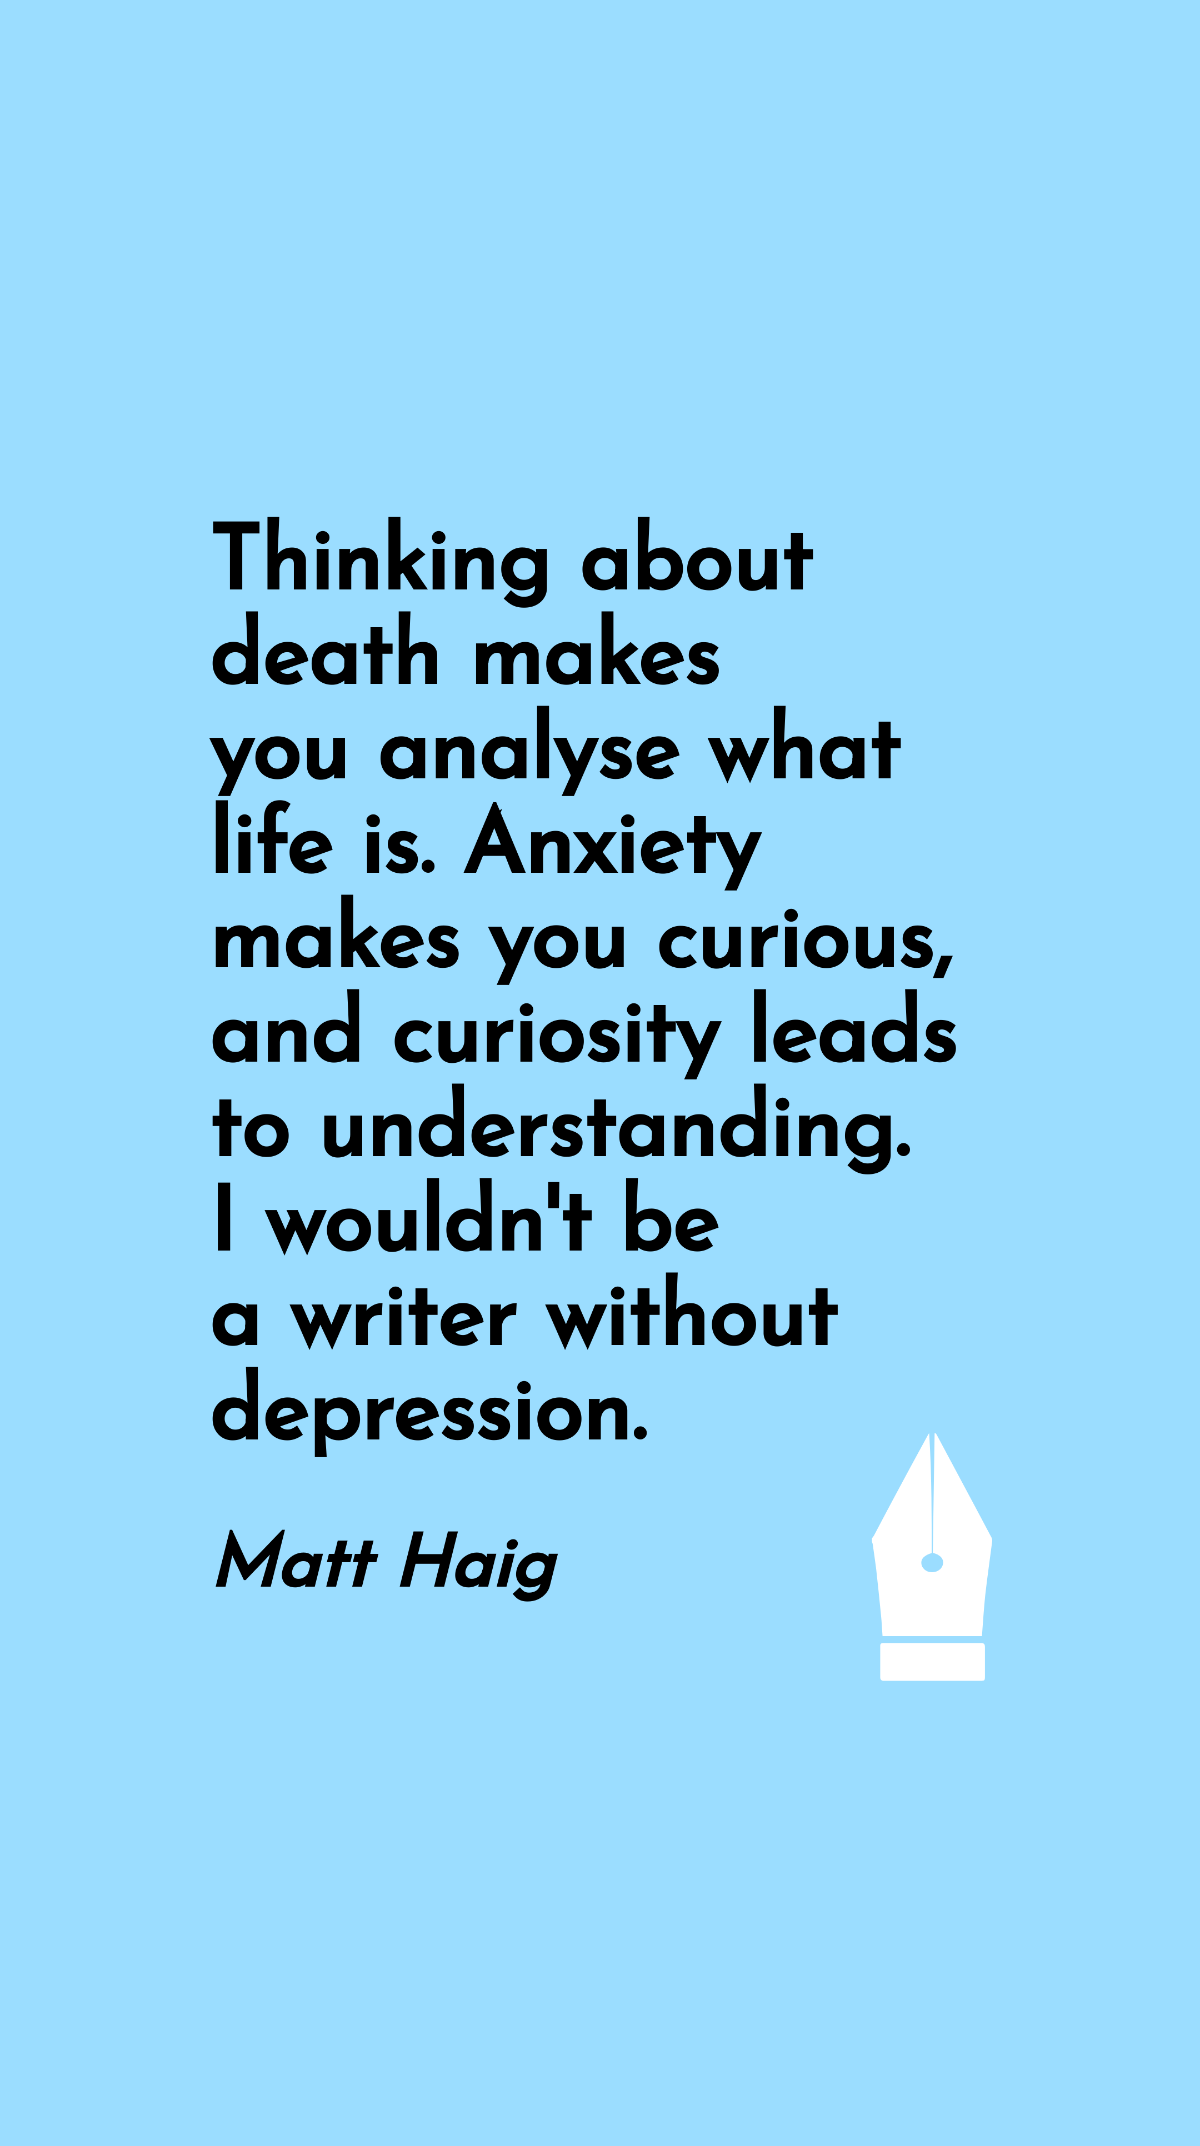 Matt Haig - Thinking about death makes you analyse what life is. Anxiety makes you curious, and curiosity leads to understanding. I wouldn't be a writer without depression.